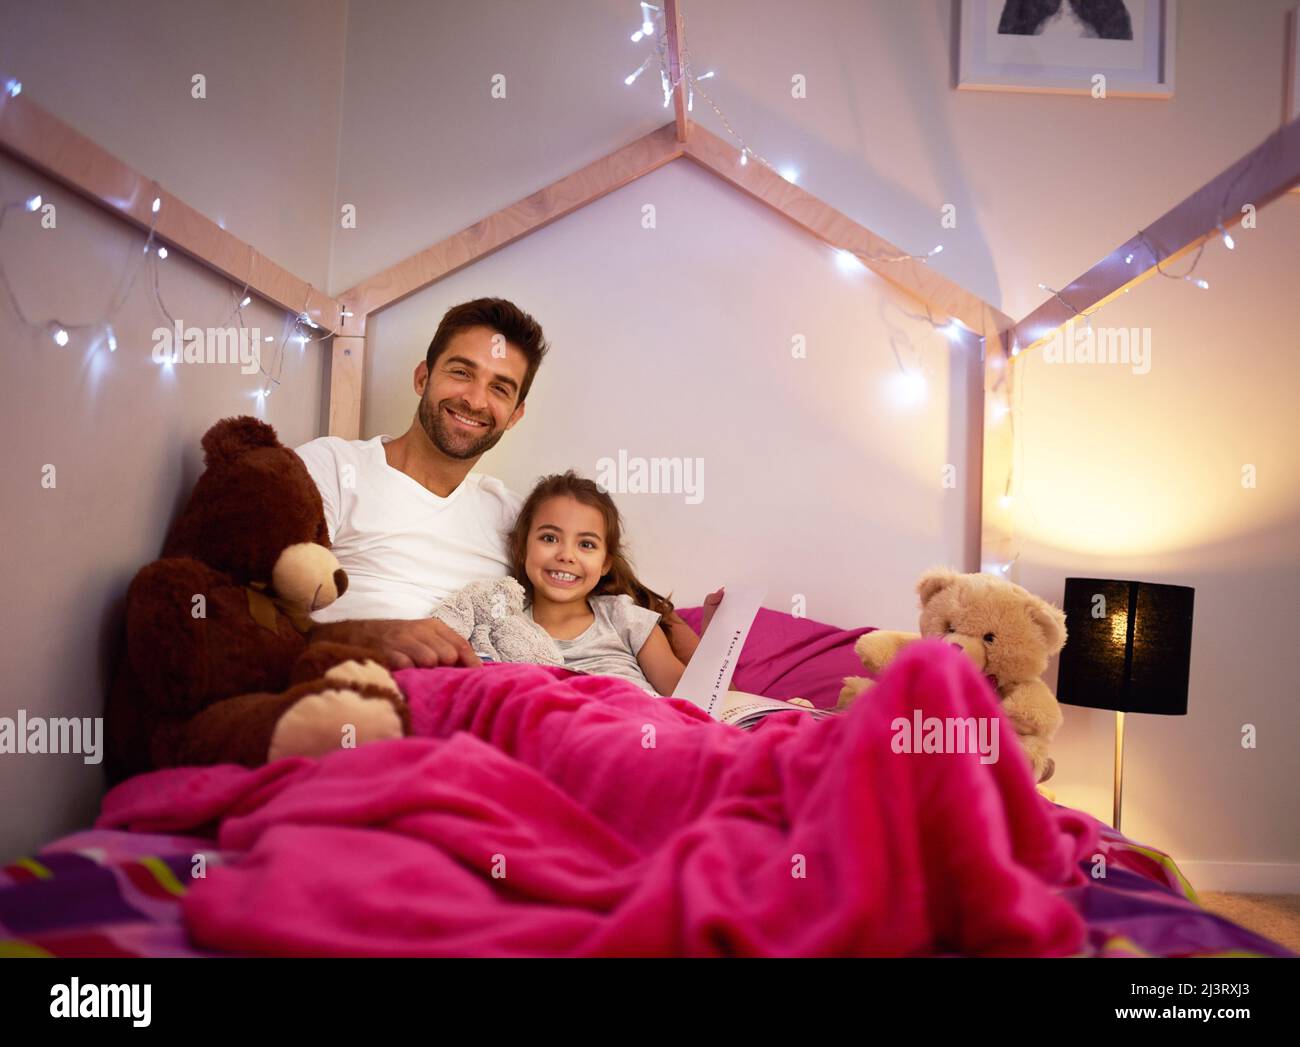 Whats a bedtime routine without a bedtime story. Portrait of a father reading a book with his little daughter in bed at home. Stock Photo